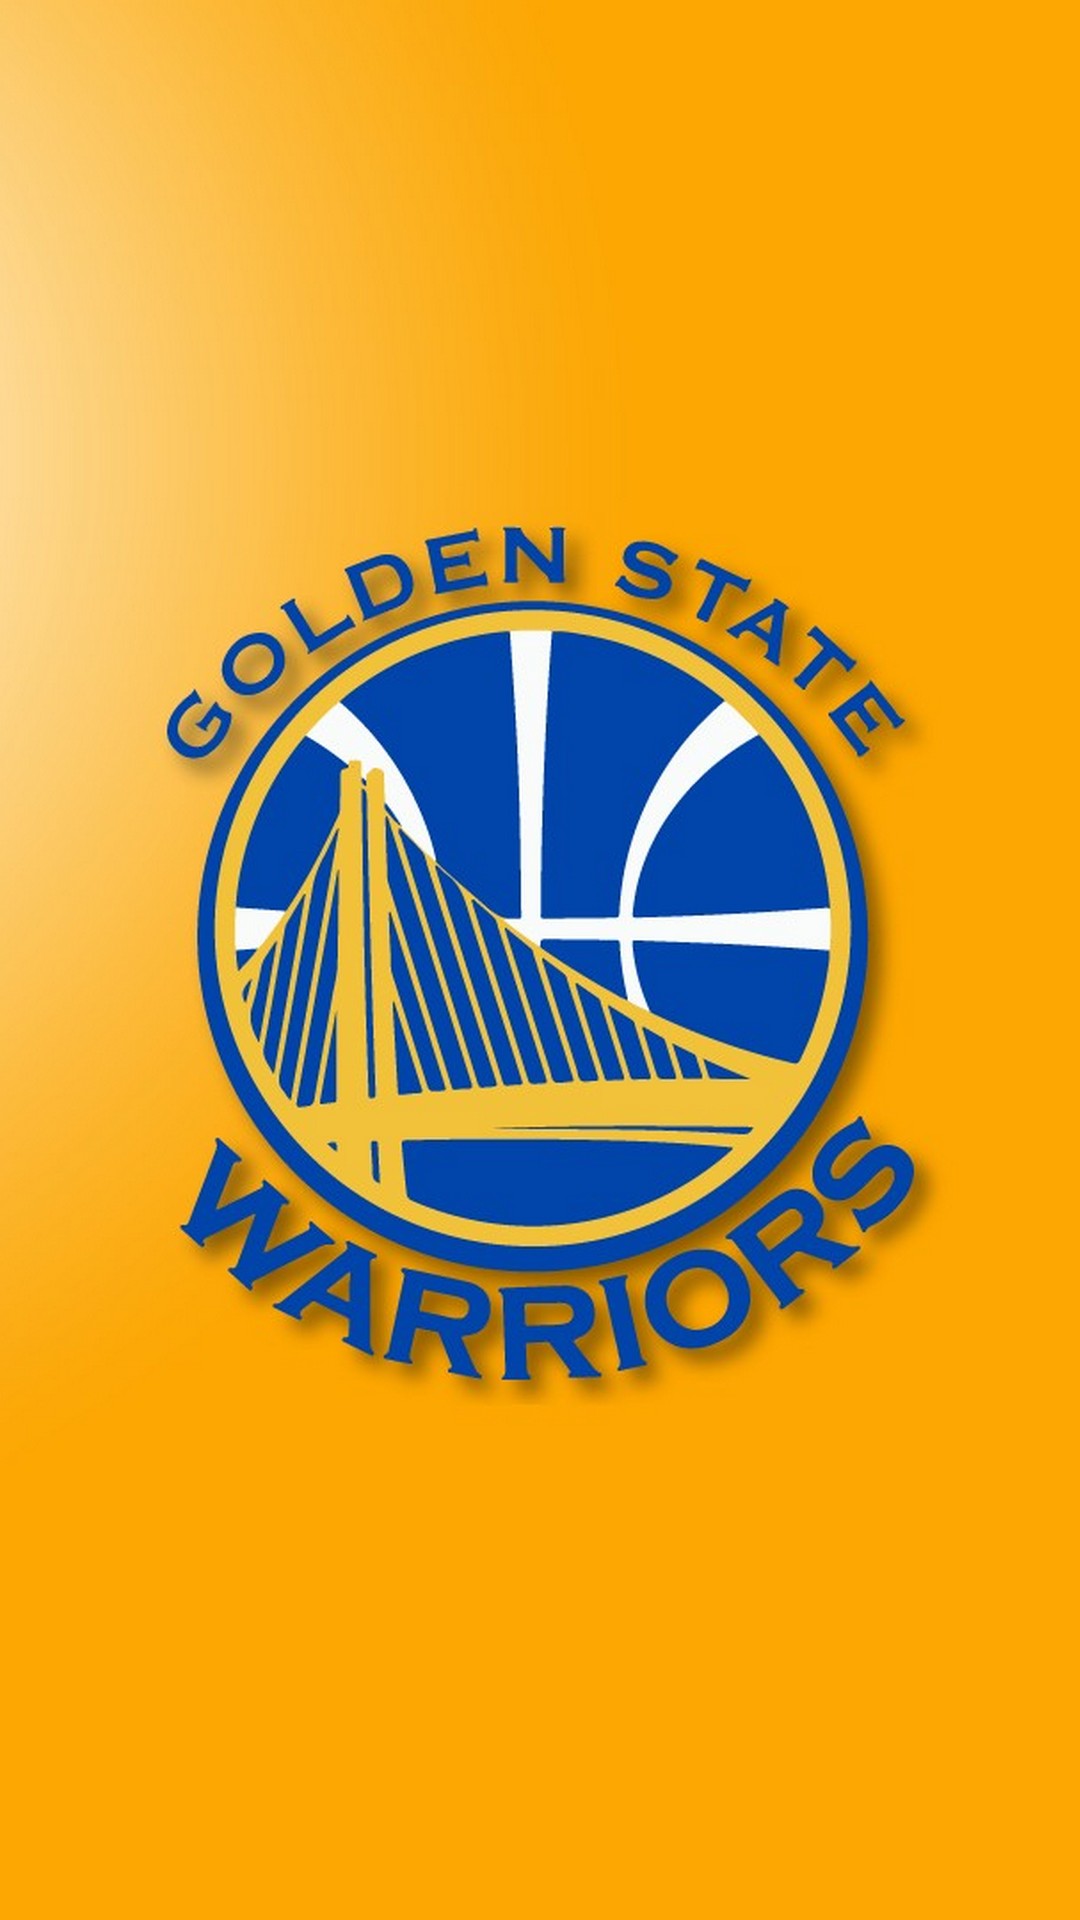 iPhone 8 Wallpaper Golden State Warriors with resolution 1080X1920 pixel. You can make this wallpaper for your iPhone 5, 6, 7, 8, X backgrounds, Mobile Screensaver, or iPad Lock Screen